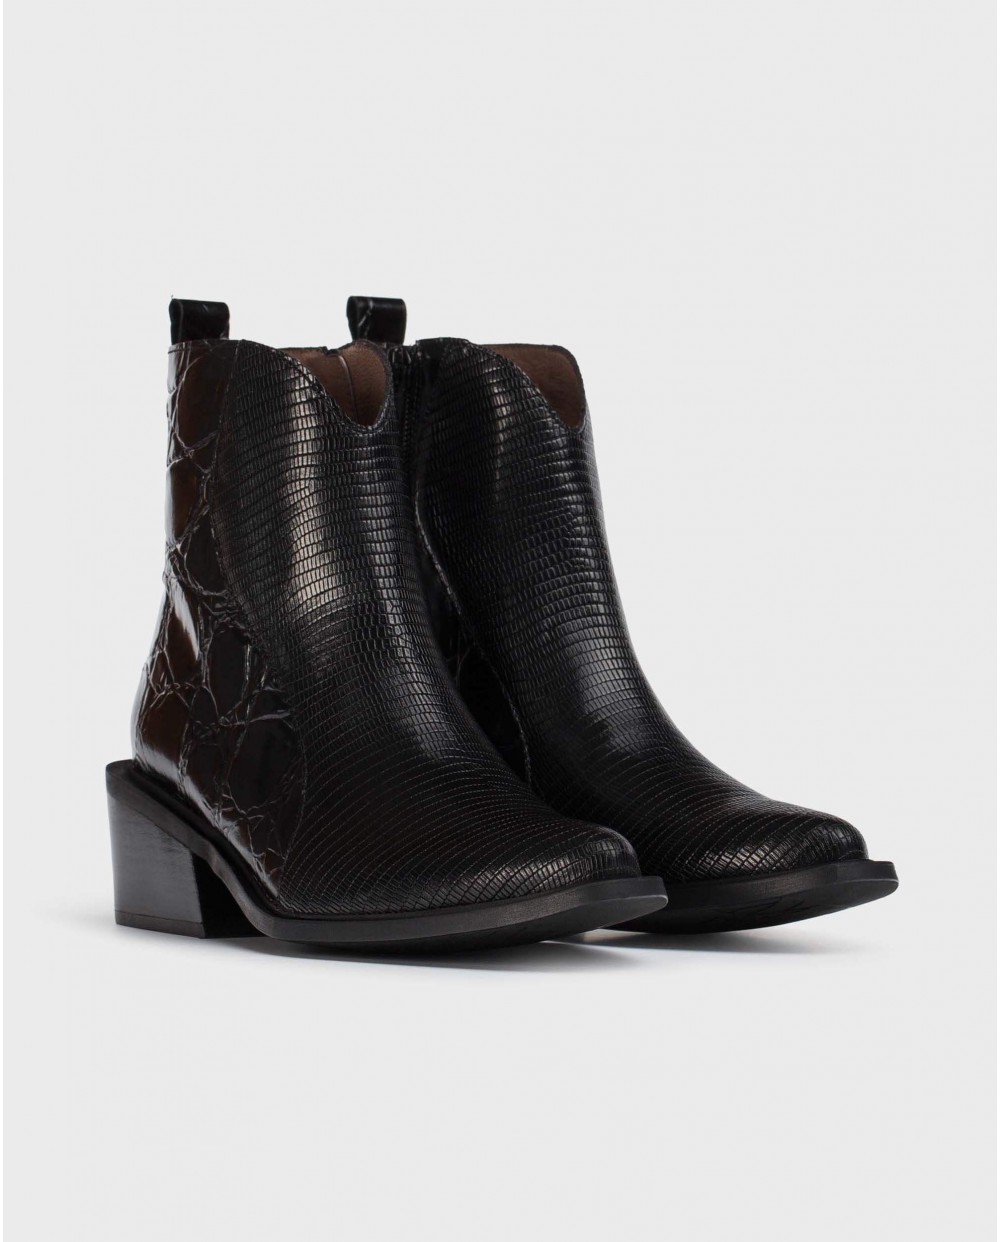 Wonders-Ankle Boots-Black Sacramento Ankle Boot